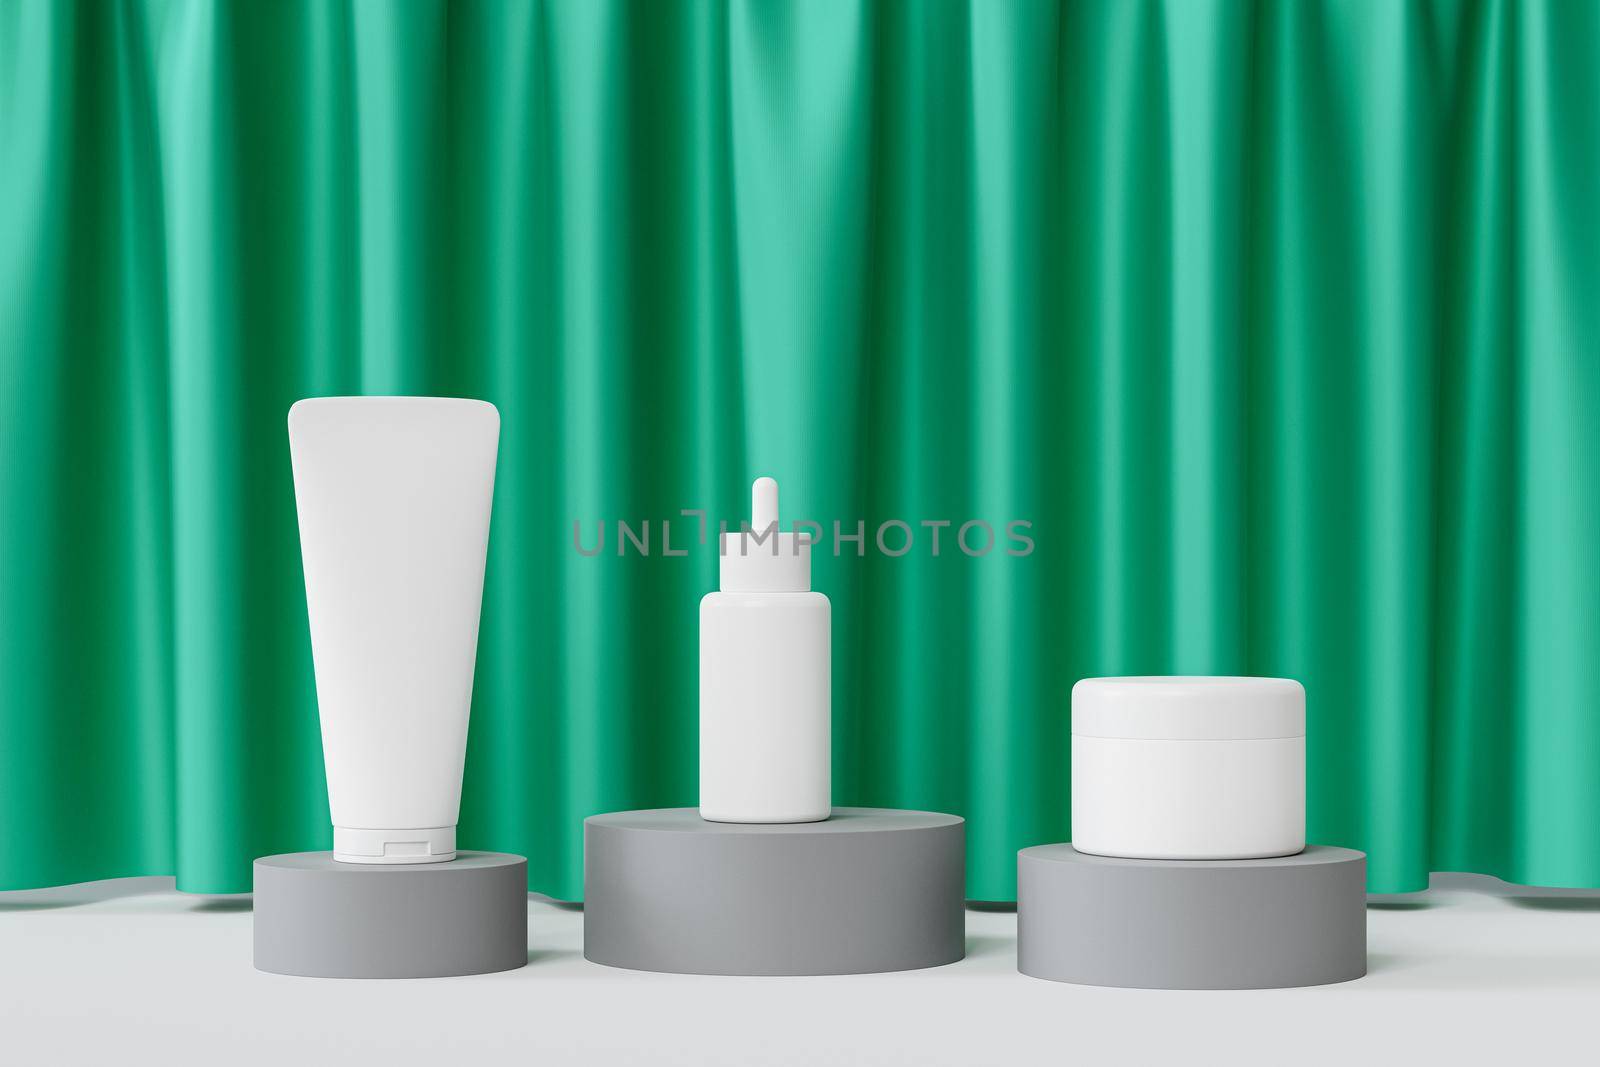 Mockup dropper bottle, lotion tube and cream jar for cosmetics products or advertising on gray podiums with green curtains, 3d illustration render